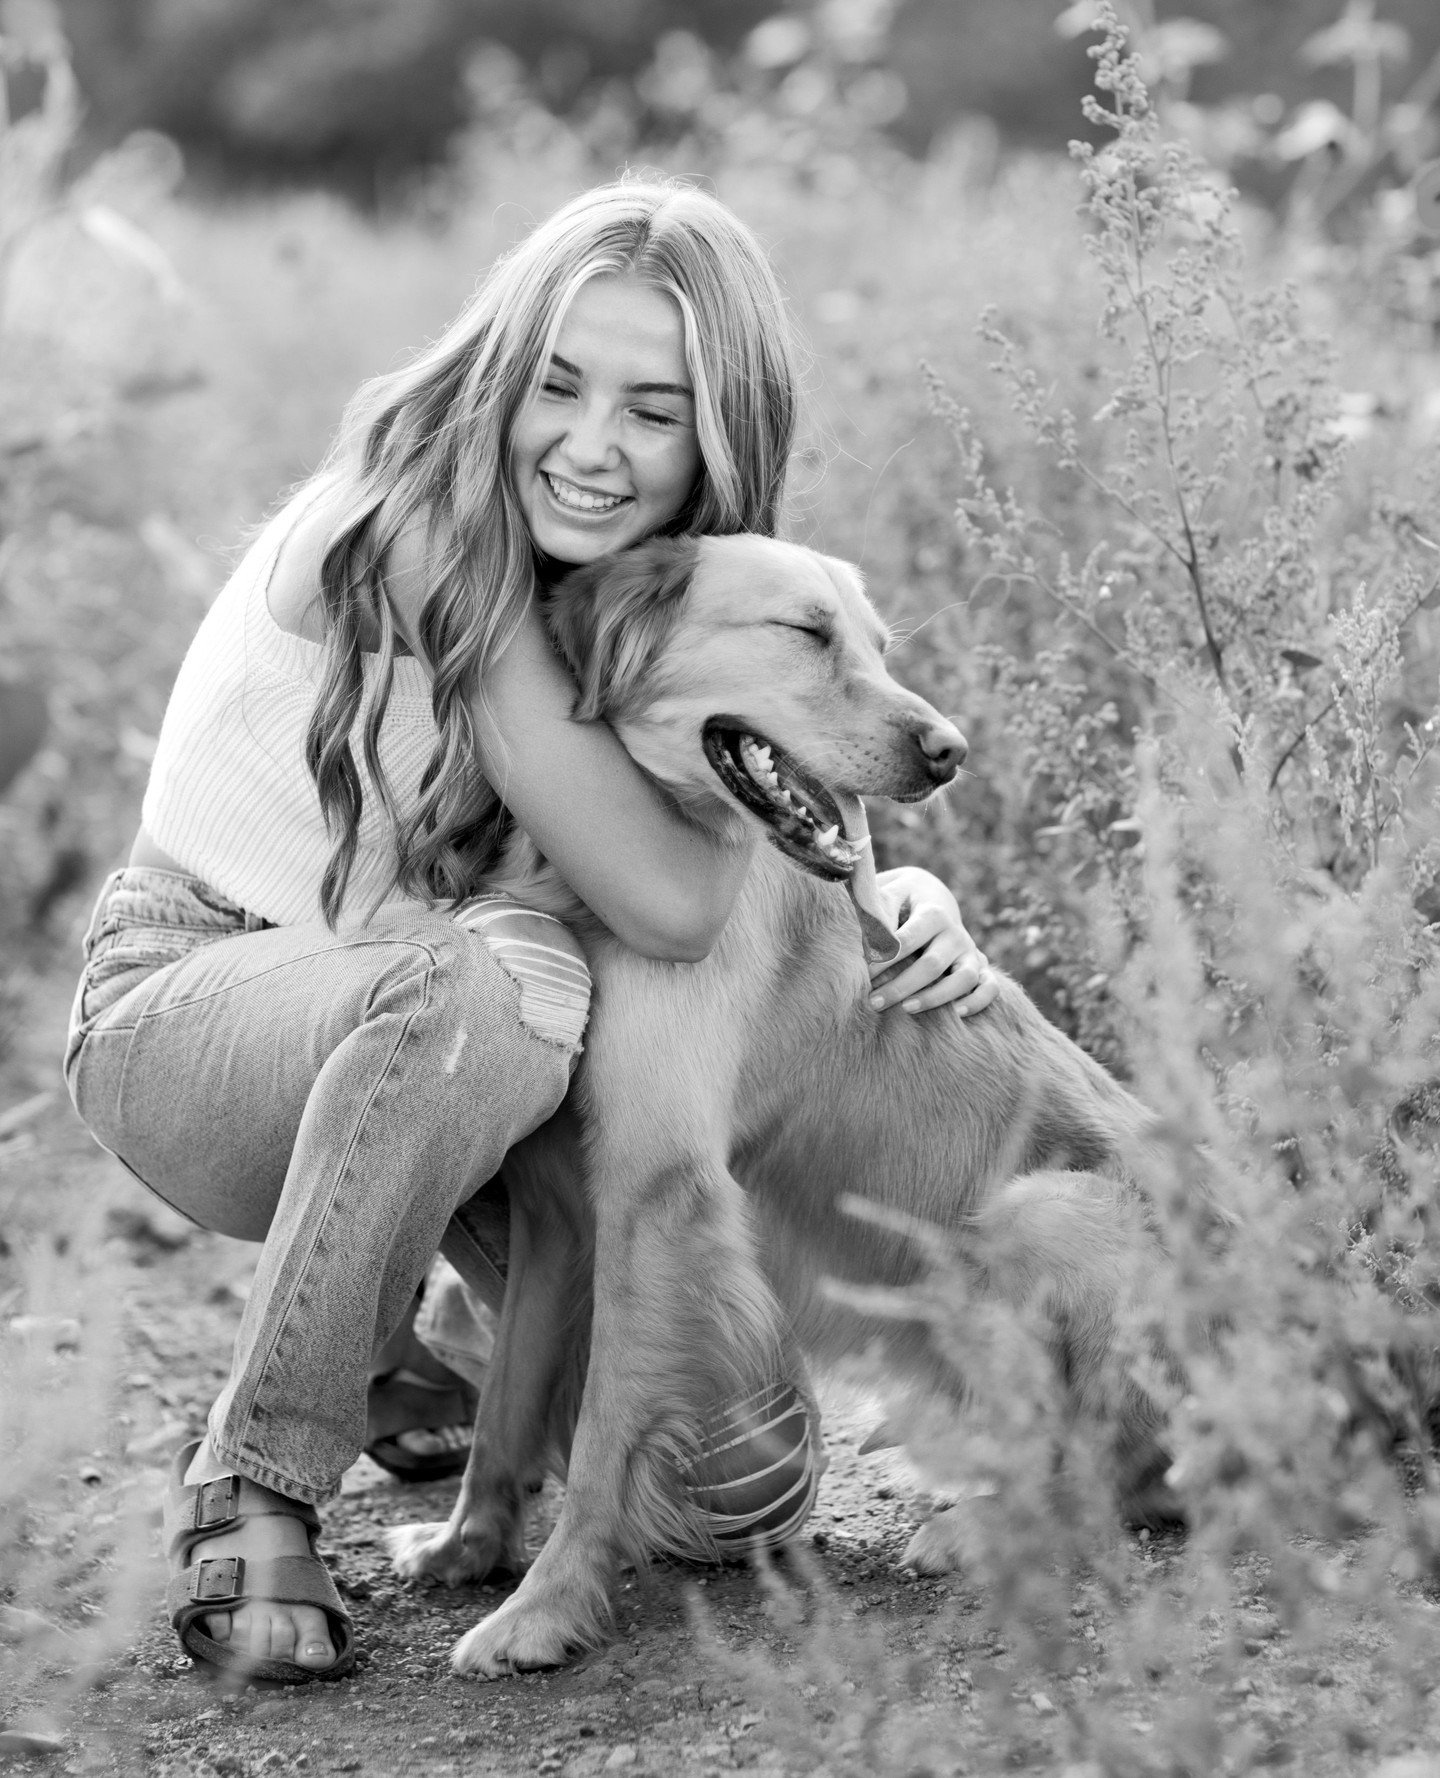 It's almost graduation season! ⁠
Seems like the perfect time to feature Kate and her sunflower-filled senior session on the blog. ⁠
Find her (and her doggie) via that profile link! ⁠
.⁠
.⁠
.⁠
.⁠
#goodphotocoloradosprings #coloradospringsseniorphotogr